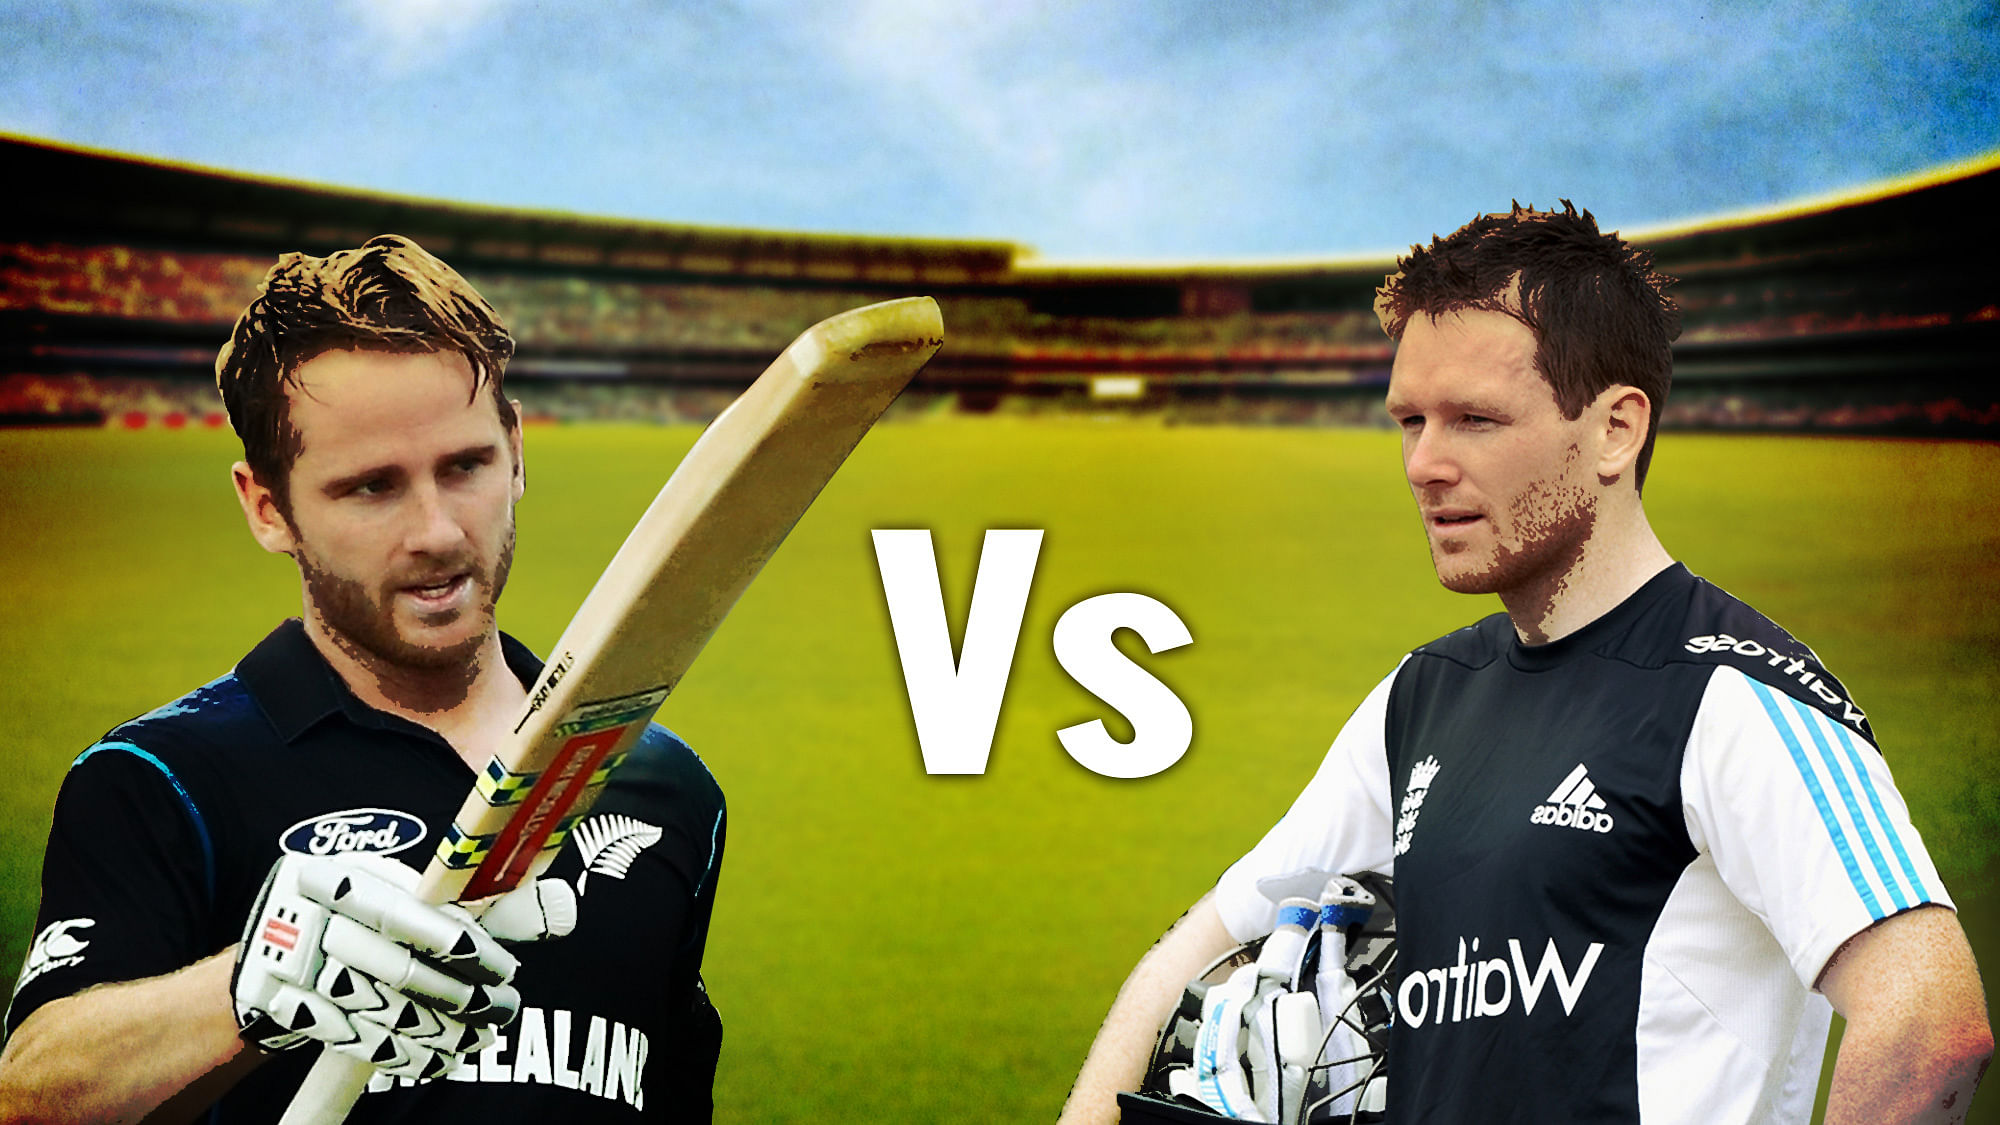 England will take on New Zealand in the first semi final of the WT20 tournament. (Photo: <b>The Quint</b>)